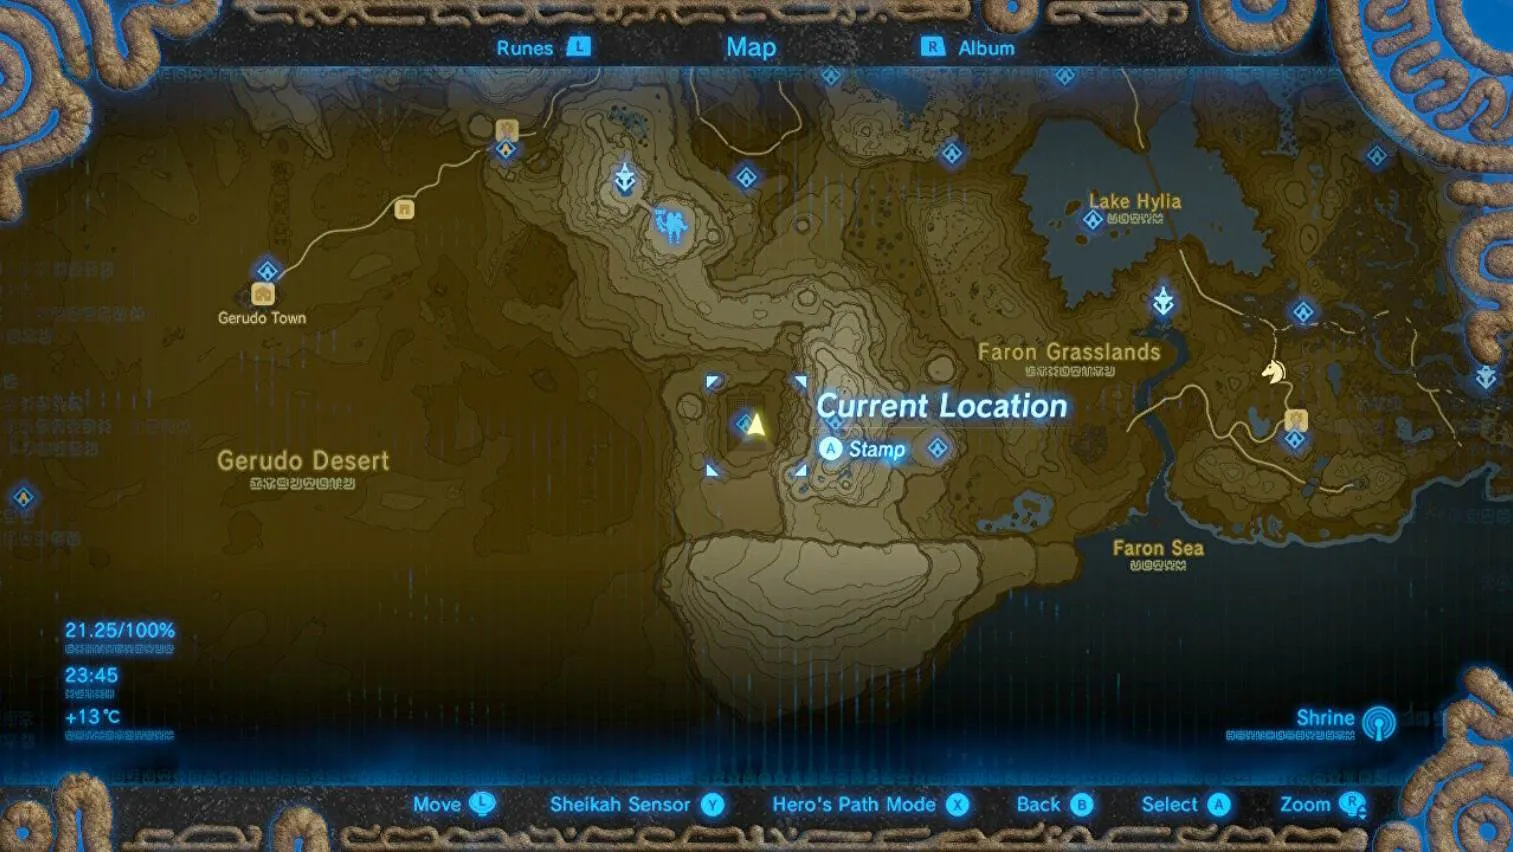 How Many Labyrinths Are in The Legend of Zelda: Breath of the Wild?